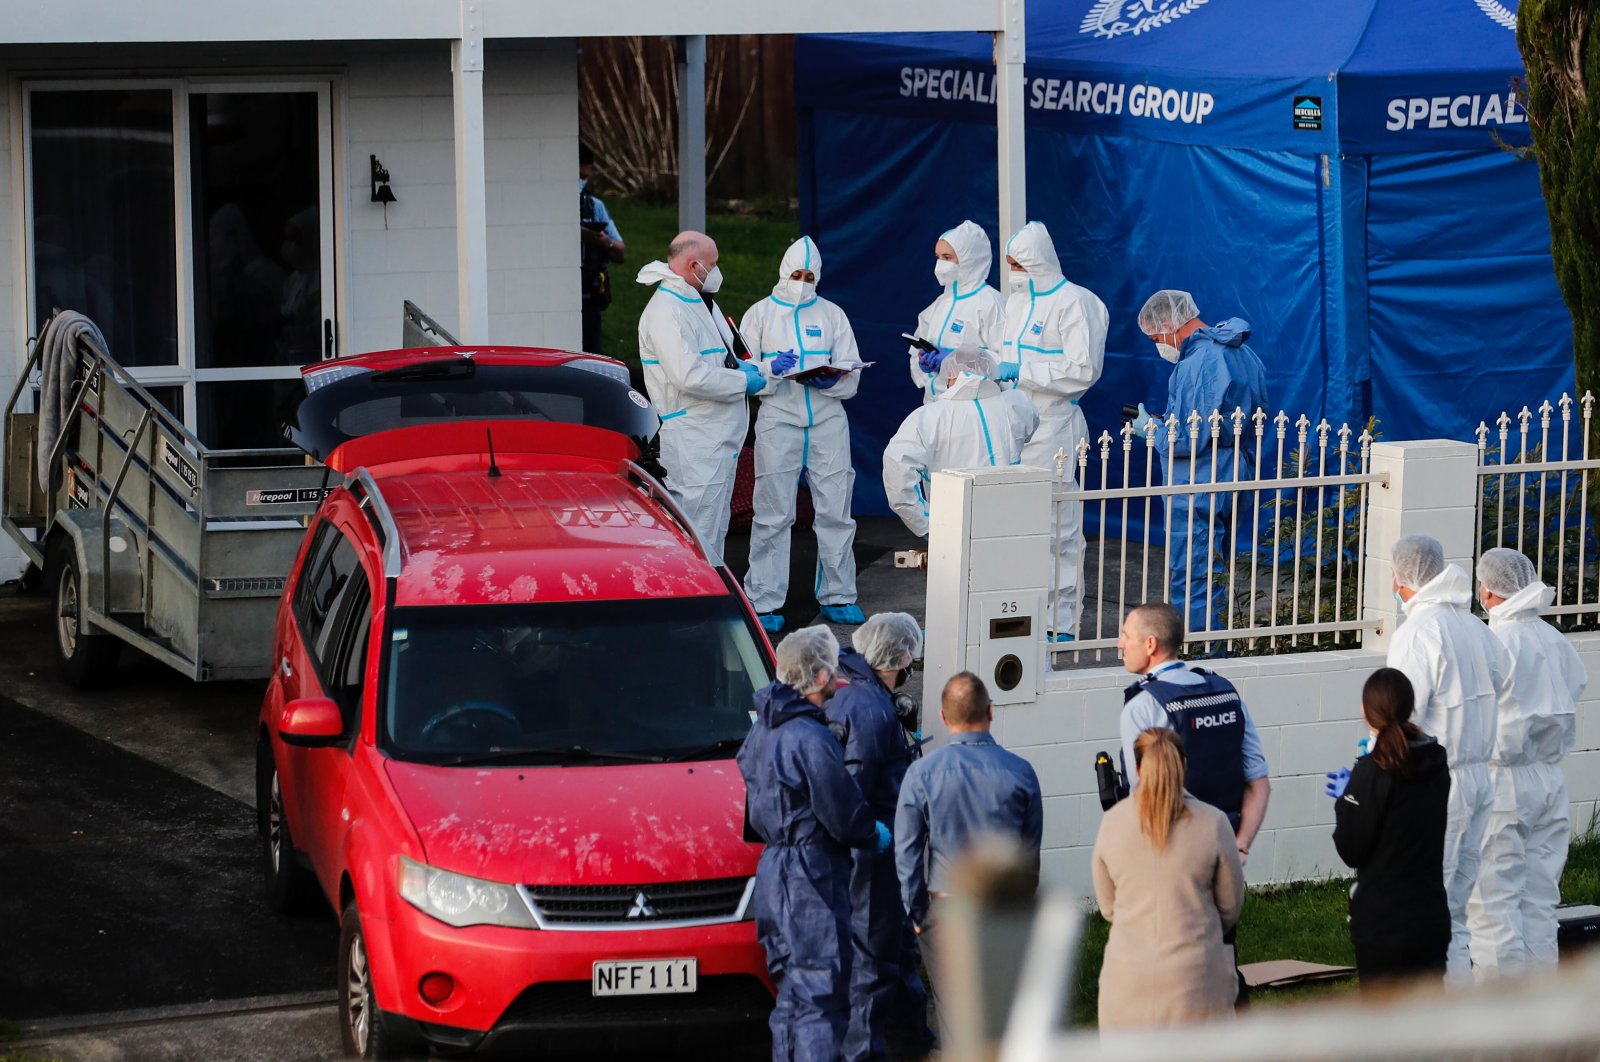 New Zealand police investigators work at a scene after bodies were discovered in suitcases, in Auckland, New Zealand, Aug. 11, 2022. (New Zealand Herald via AP)